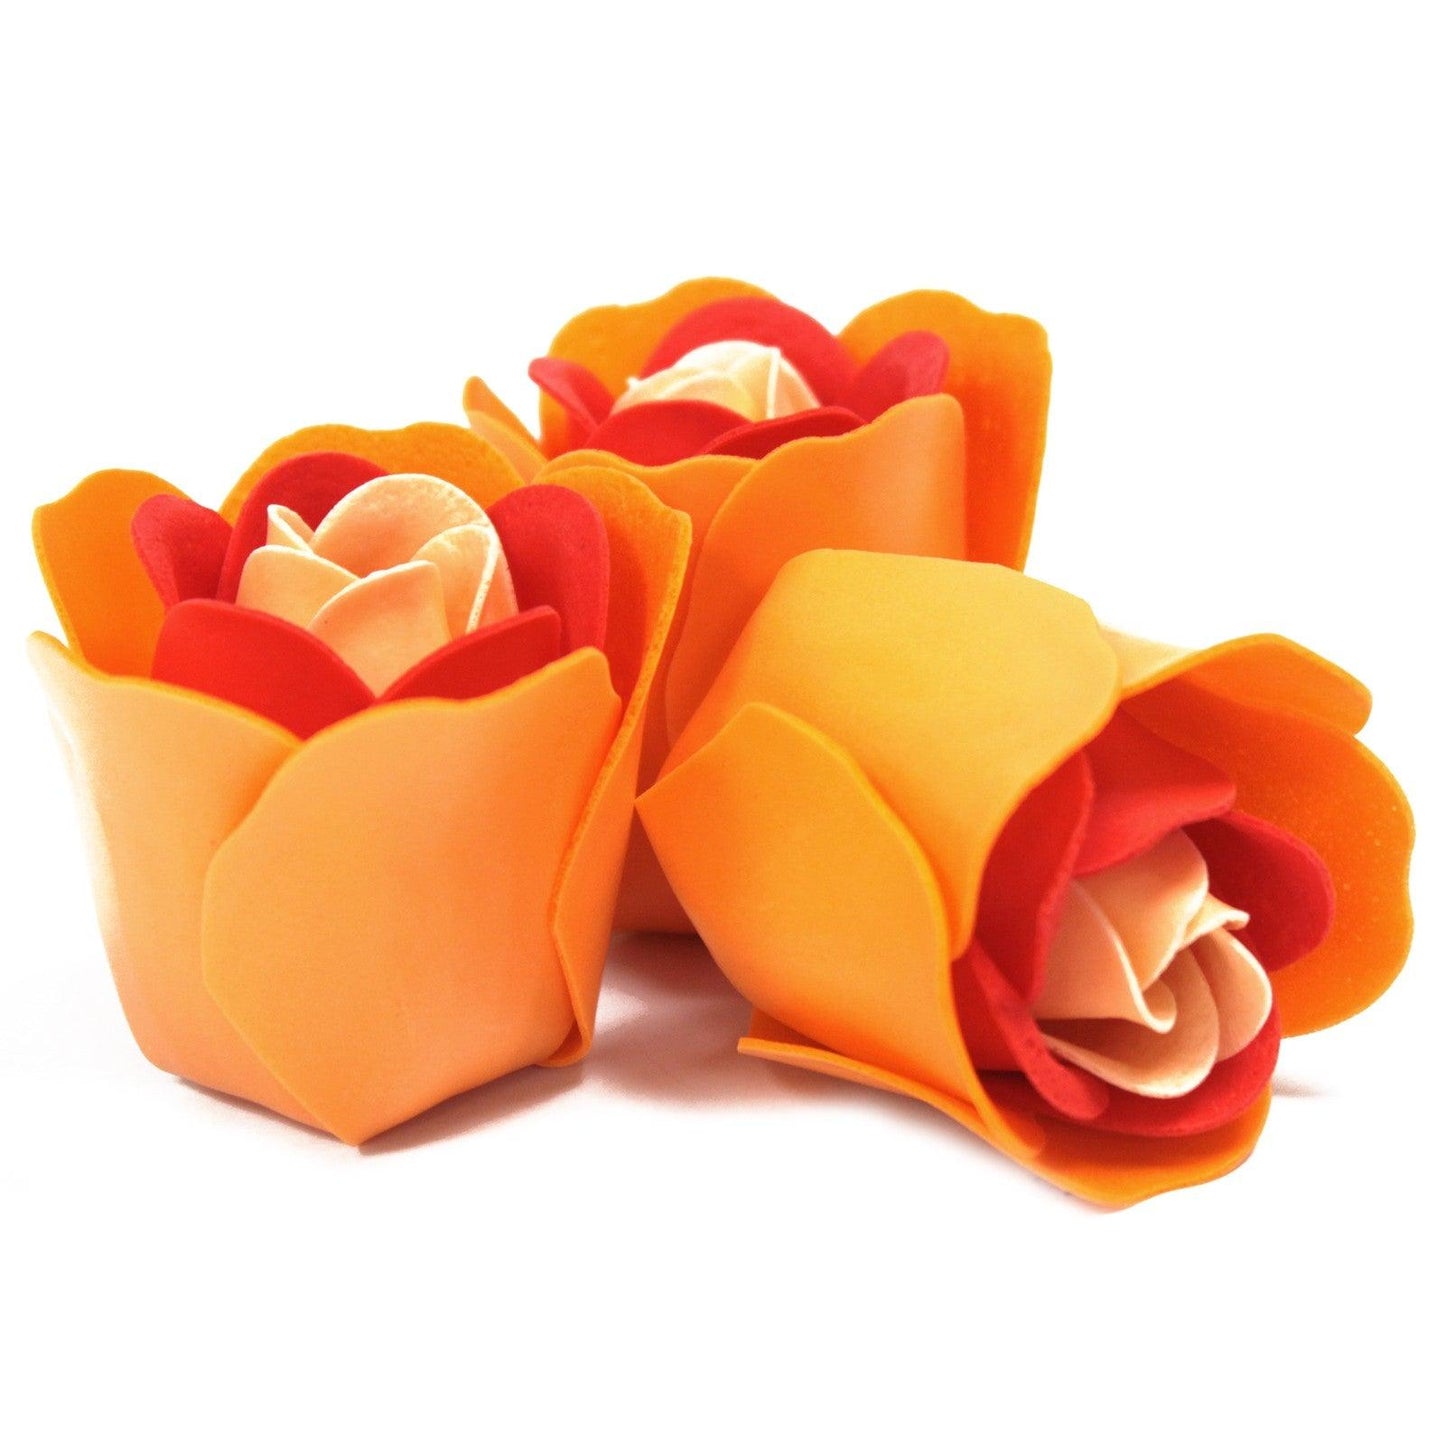 Set of 3 Soap Flower Heart Box - Peach Roses - DuvetDay.co.uk